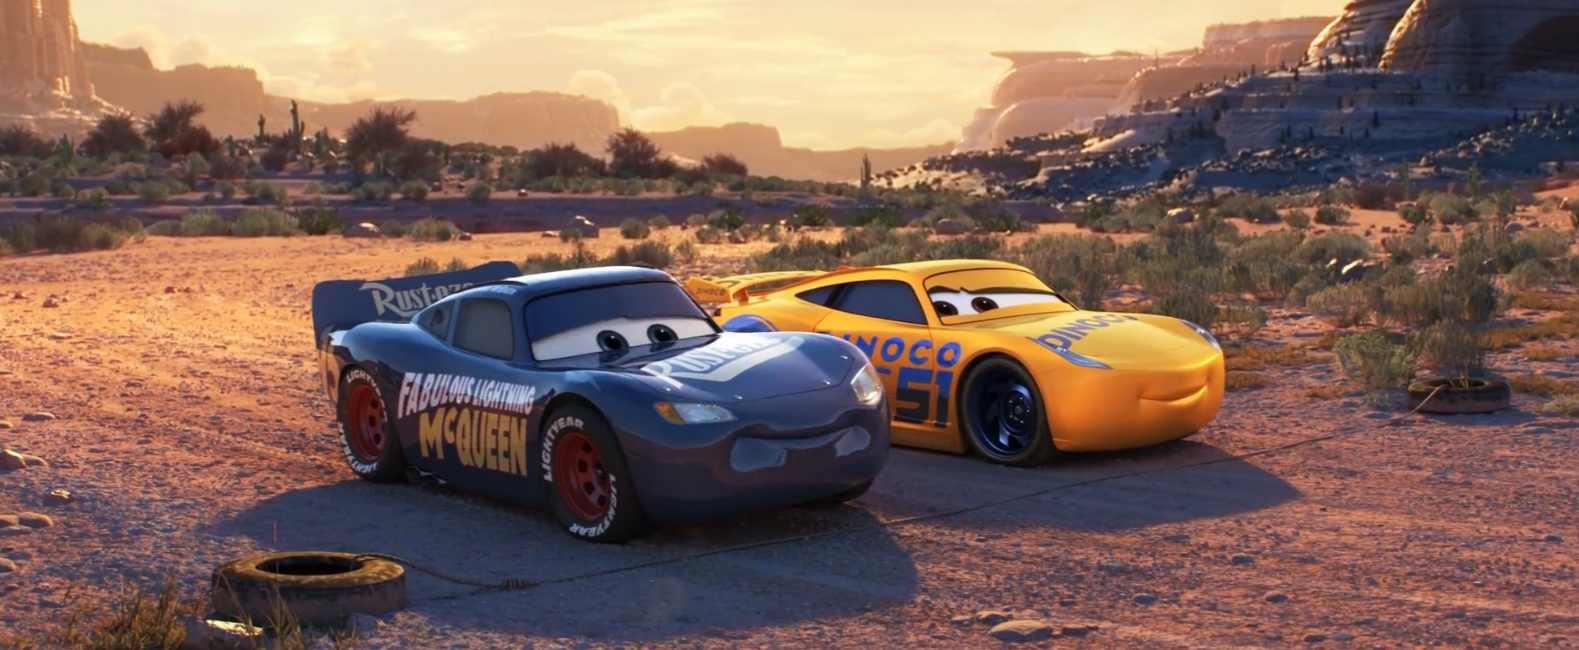 Movie Review – Cars 3 and Lou  TL;DR Movie Reviews and Analysis